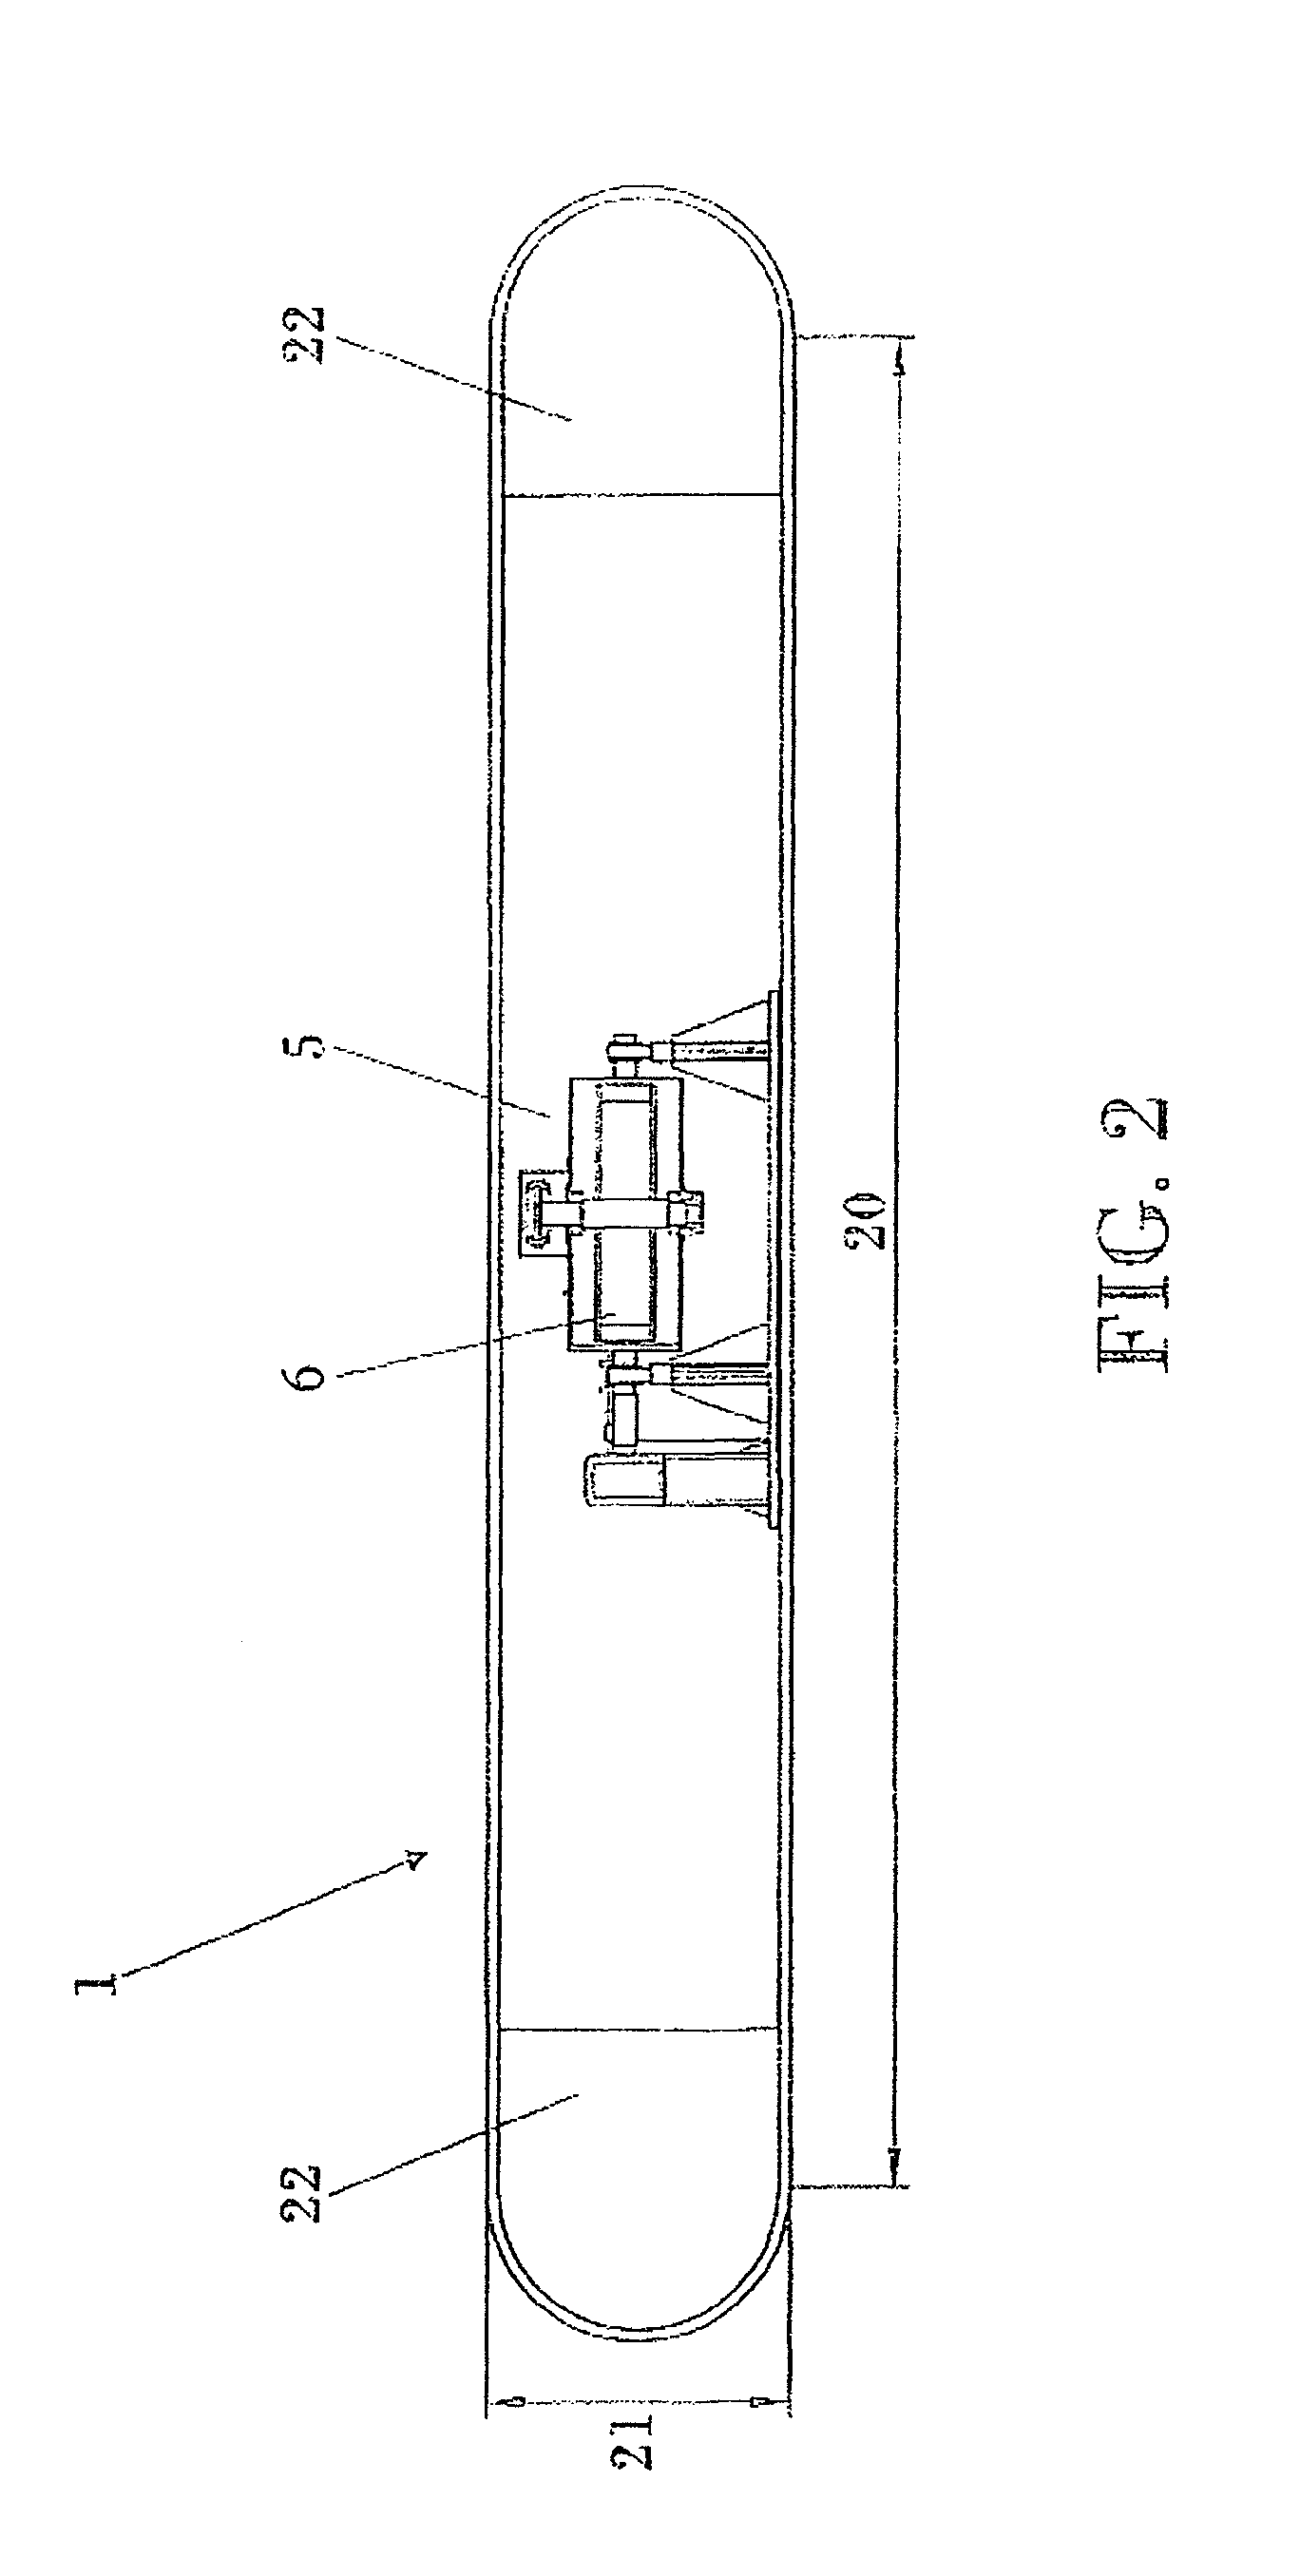 Installation and method for harnessing wave energy